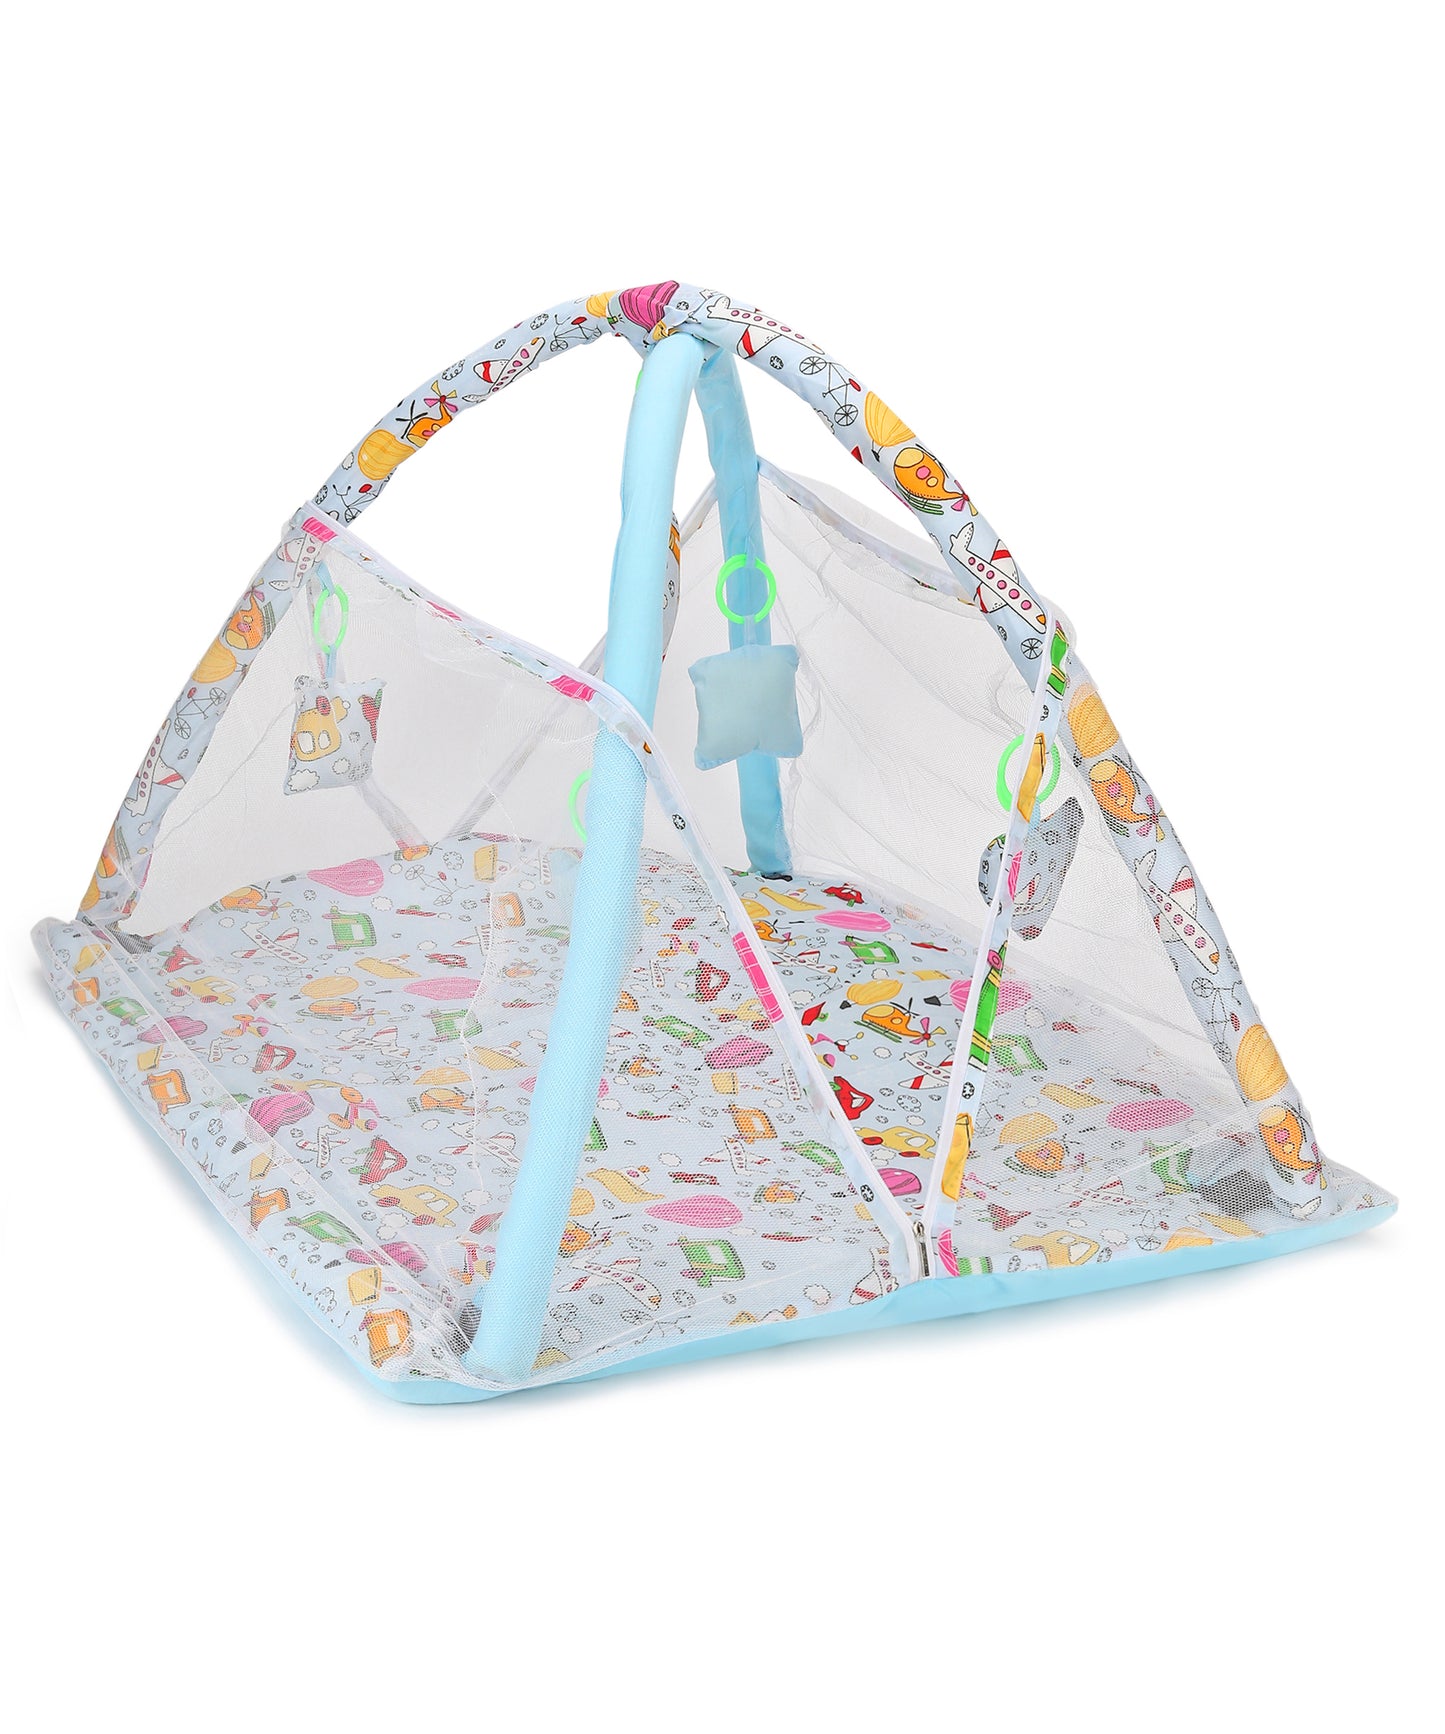 VParents Perry Baby Bedding Set/Baby Bedding Mattress Set with Mosquito Net/Baby Bed Set and Baby Play Gym with Mosquito Net